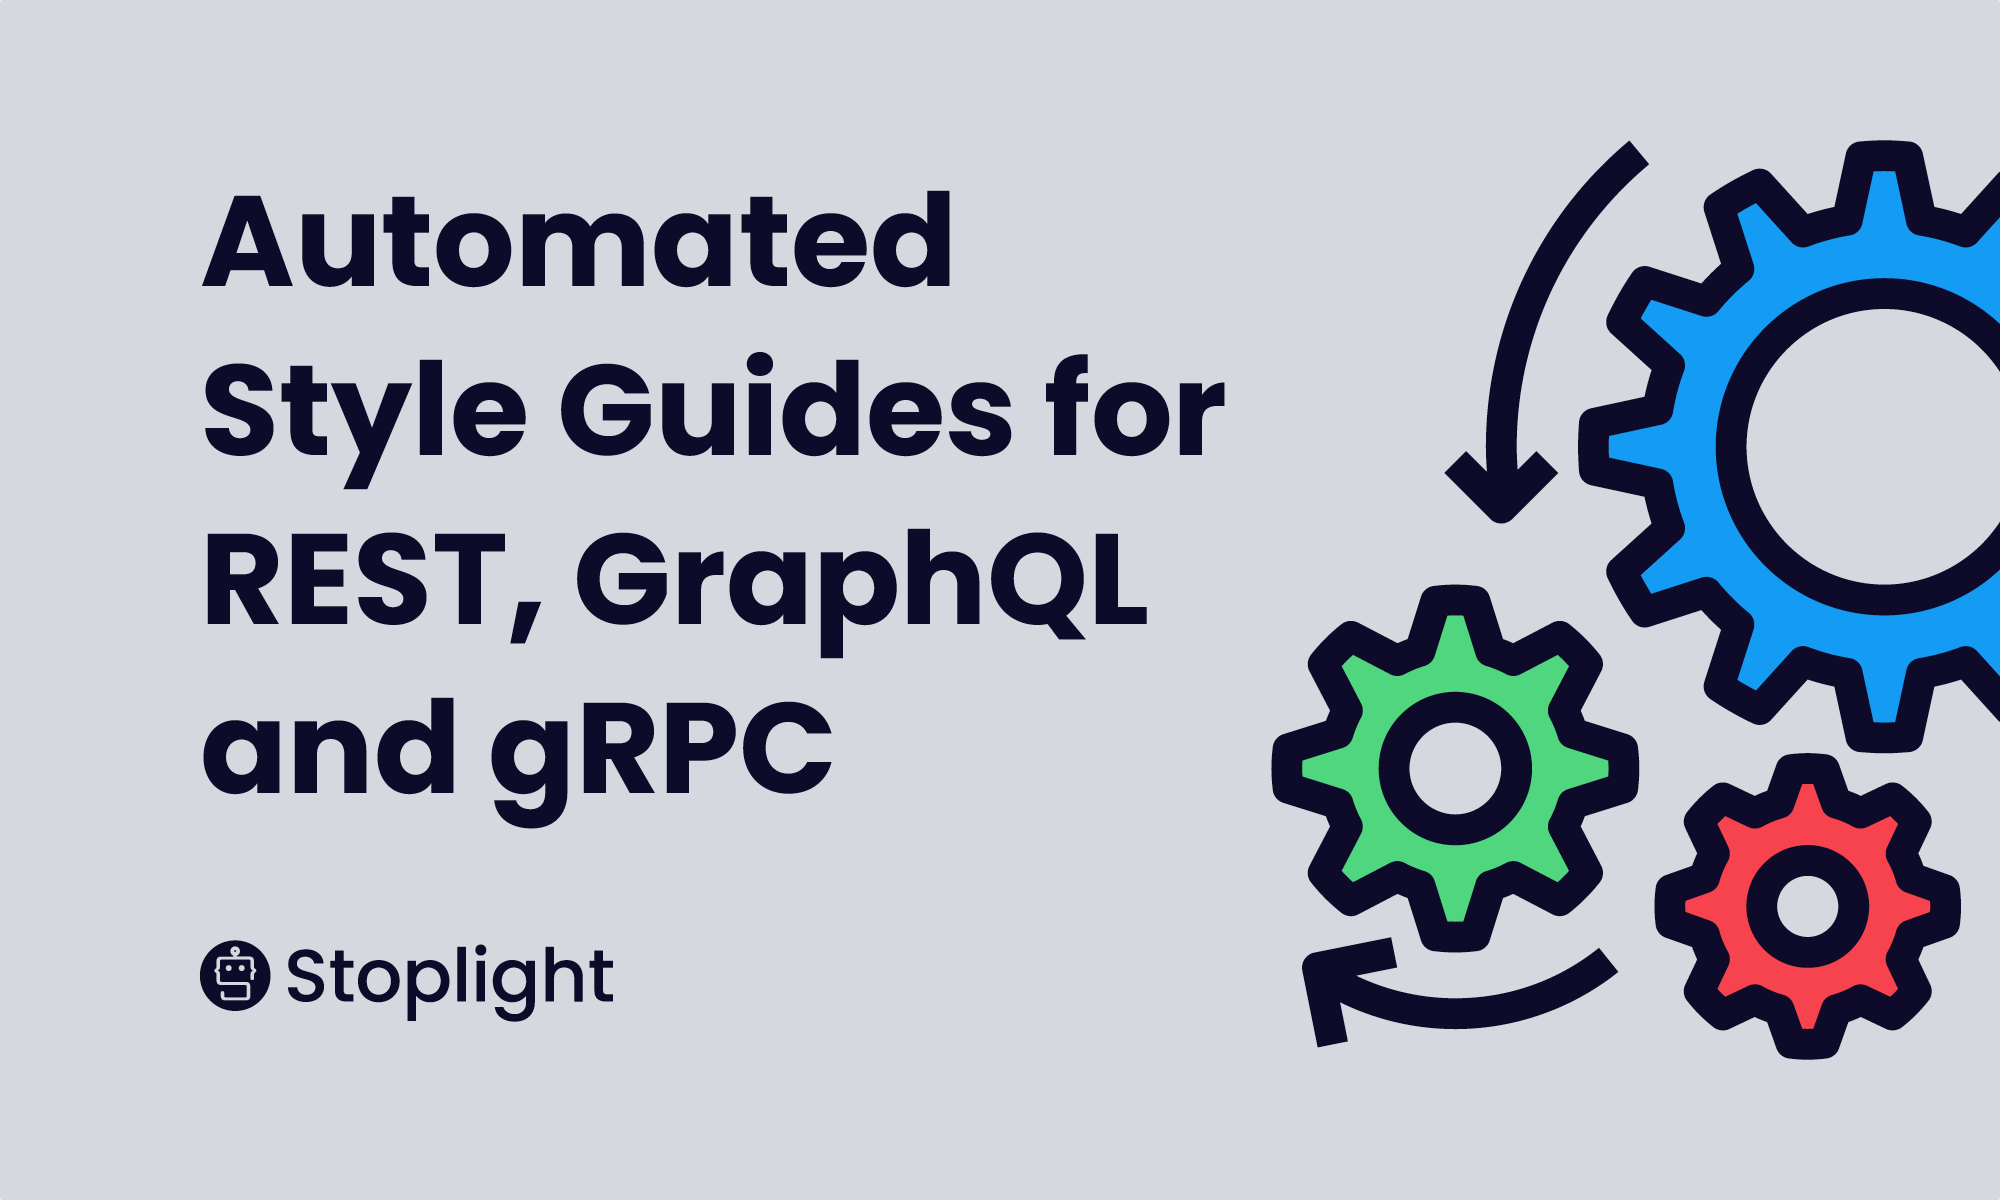 Automated Style Guides for REST, GraphQL and gRPC